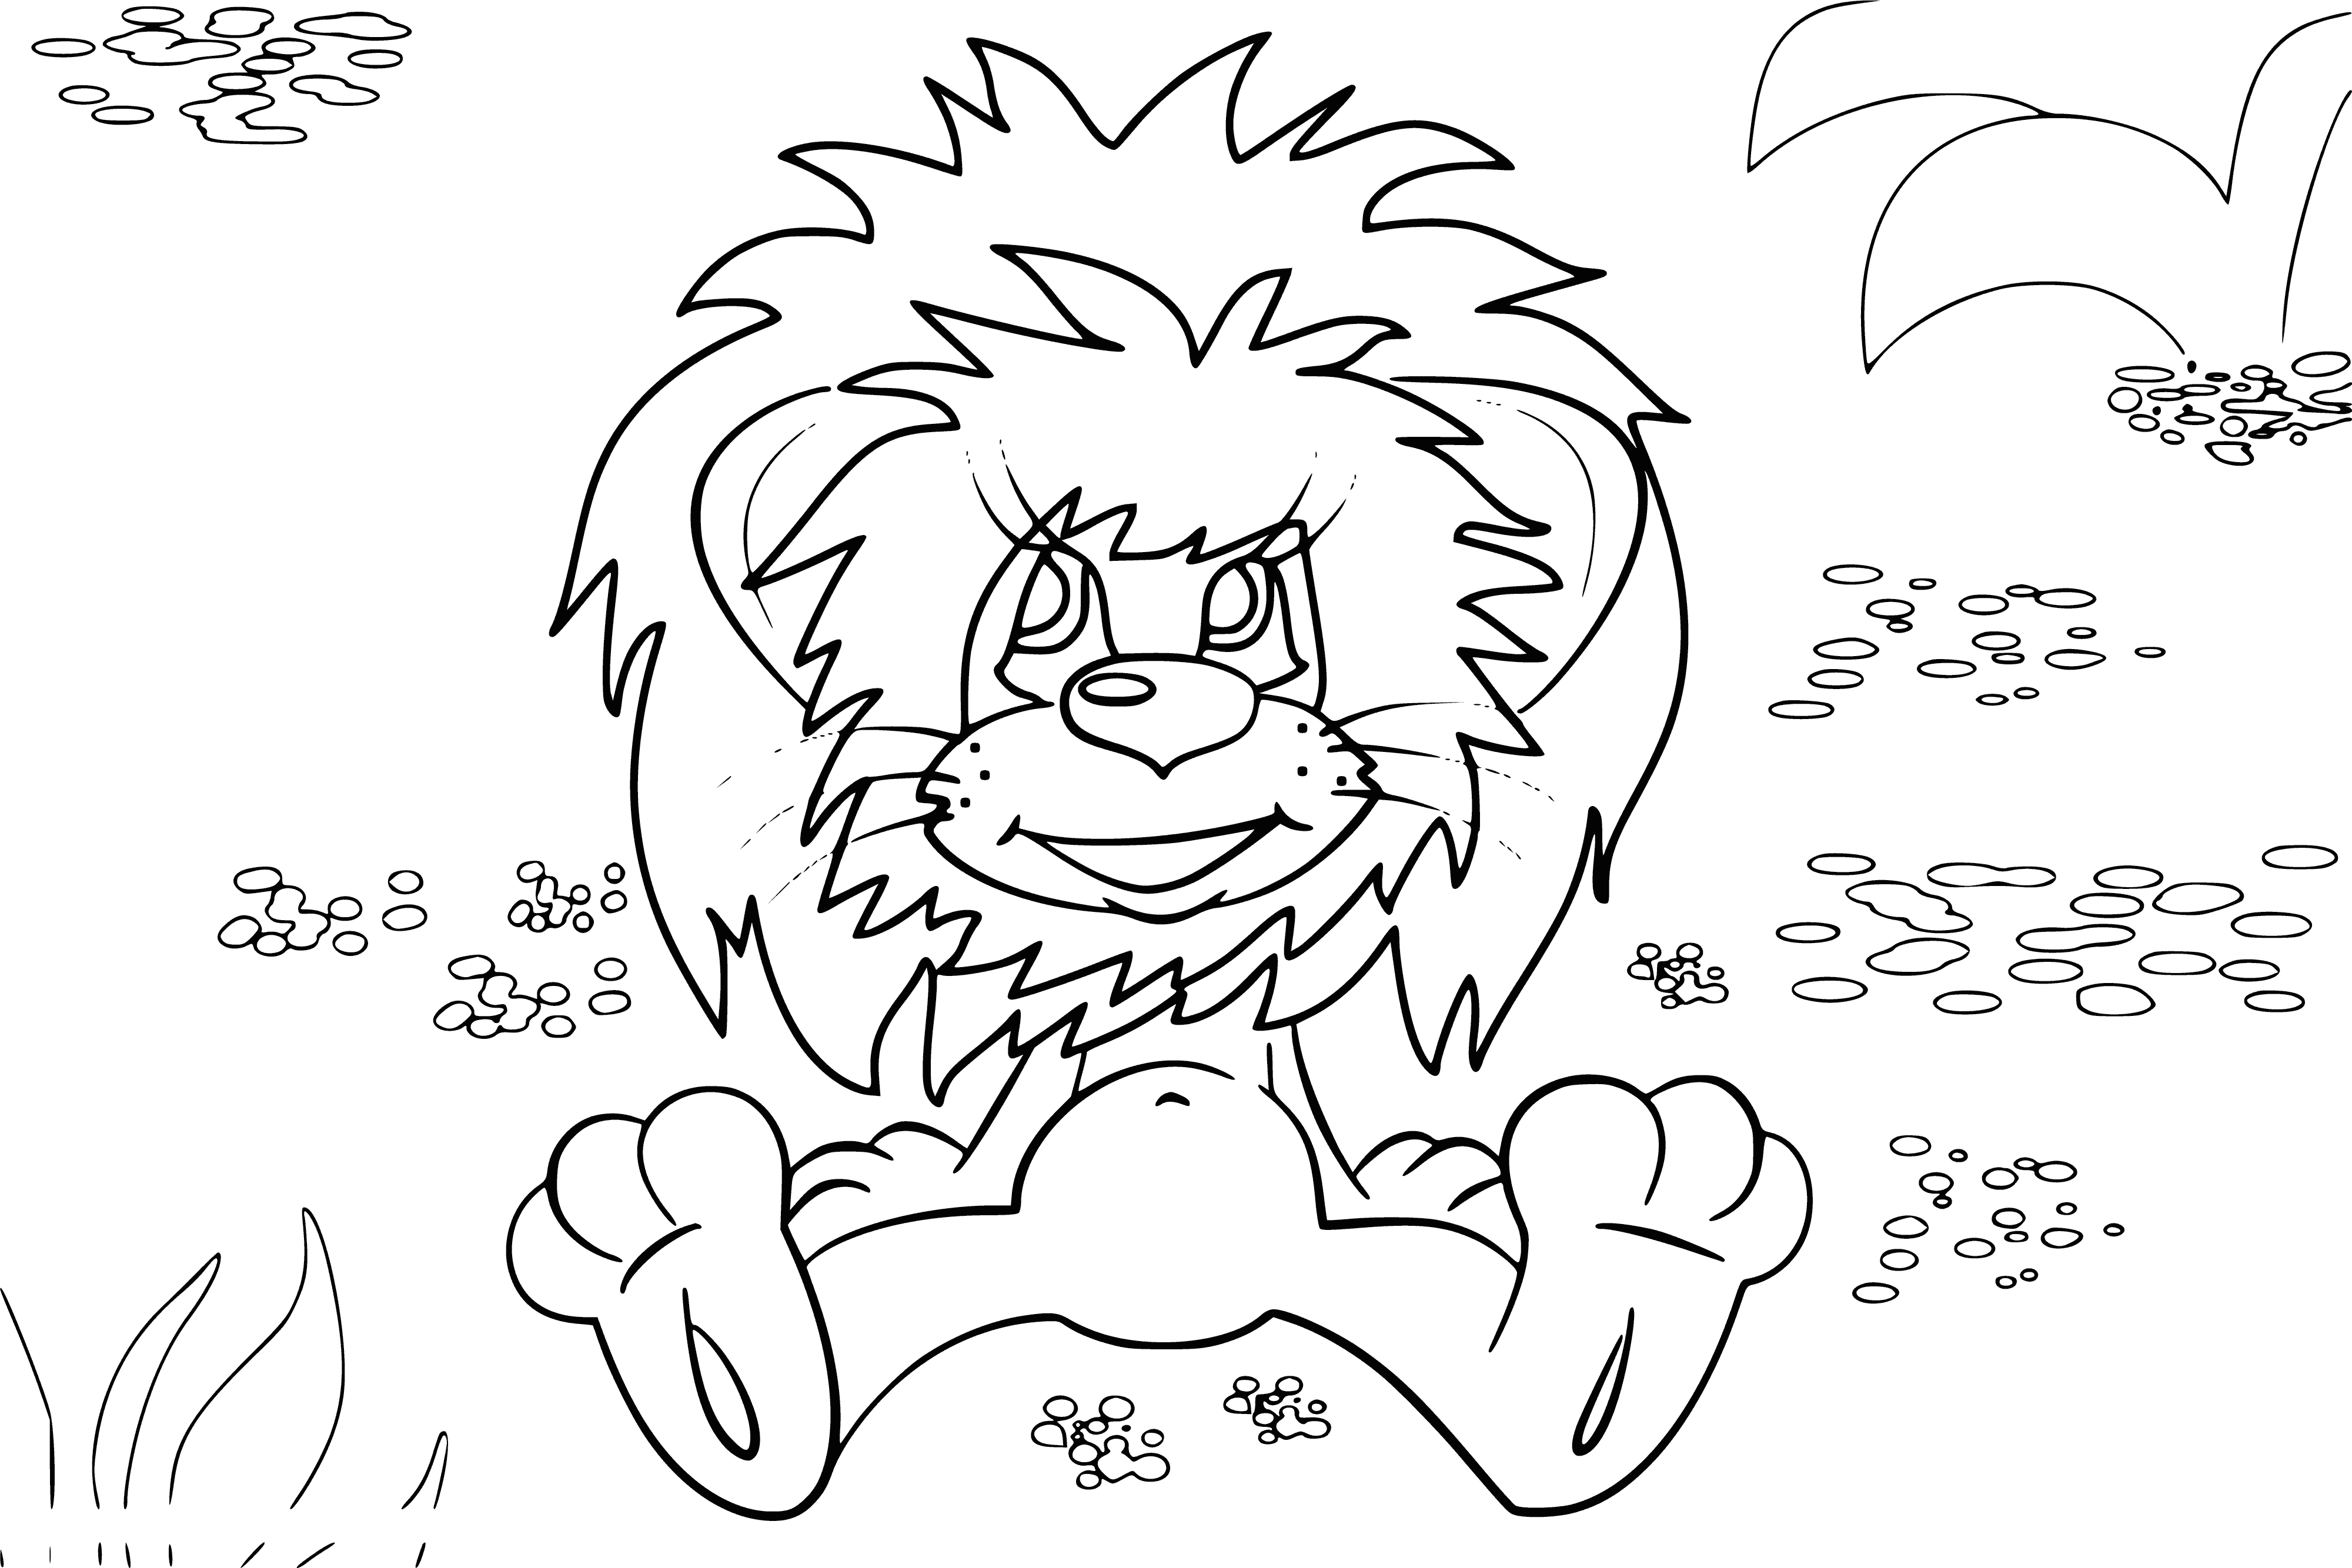 coloring page: A small lion cub and turtle are happily playing together–the lion cub perched atop the turtle's shell, grinning.